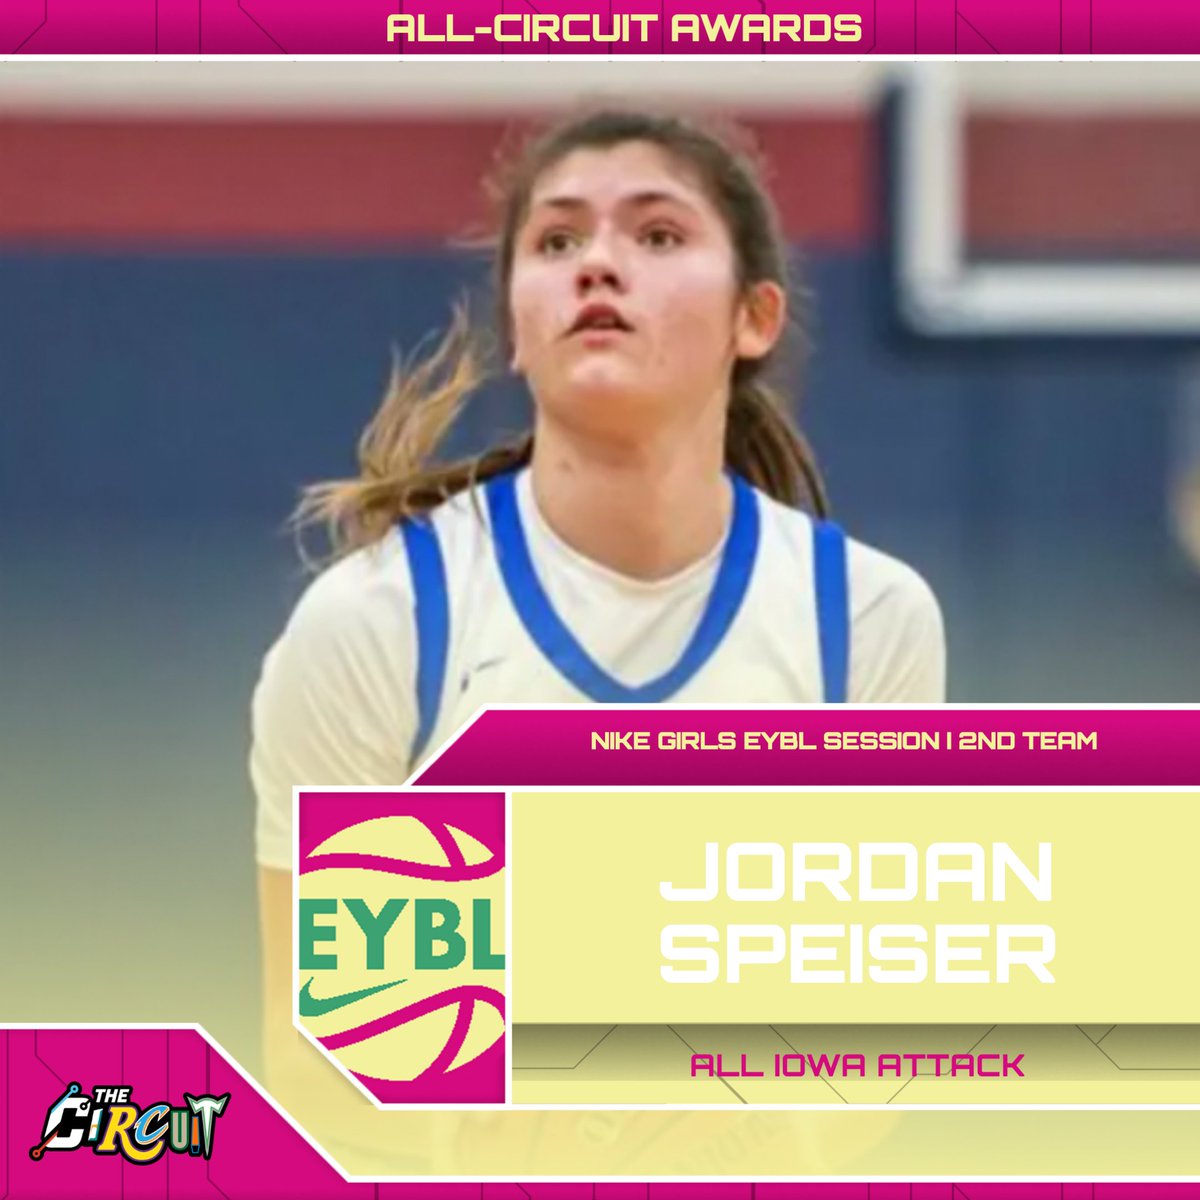 Nike EYBL Hampton | 2nd Team 🥈 Jordan Speiser | All Iowa Attack | 2025 Averages ➡️ 111.4 PPG, 5.8 RPG, 3.4 SPG, 1.6 APG All-Circuit Awards ⤵️ thecircuithoops.com/news_article/s…